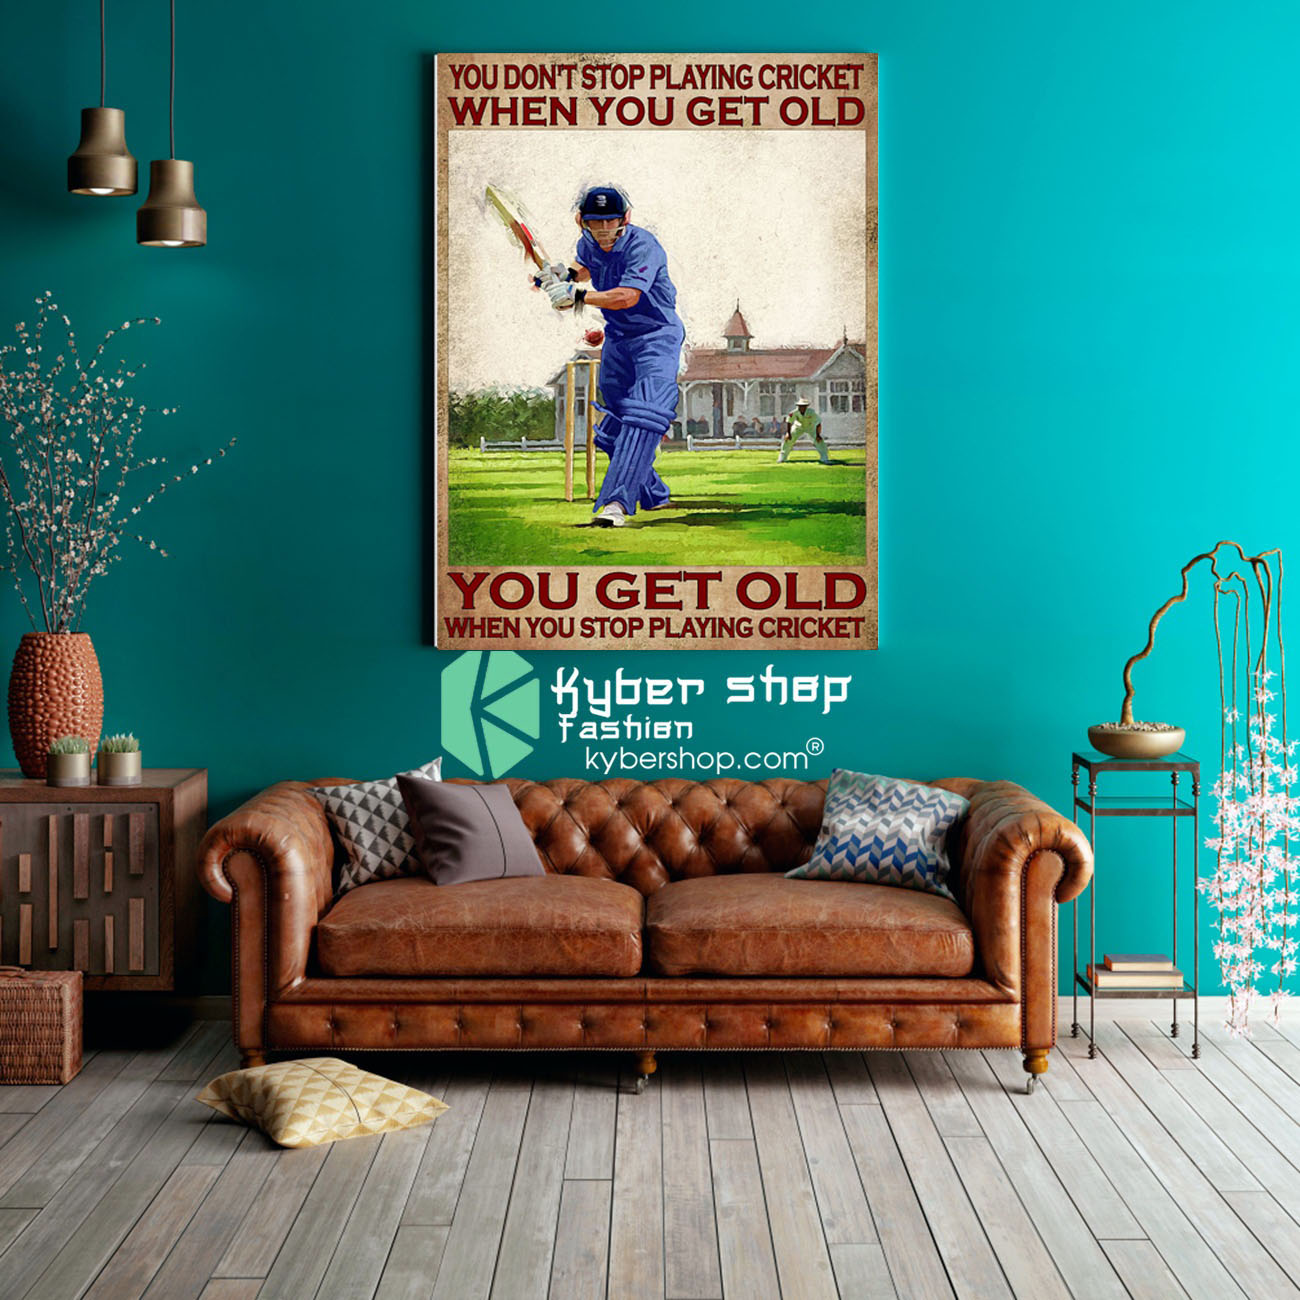 You don't stop playing cricket when you get old poster8